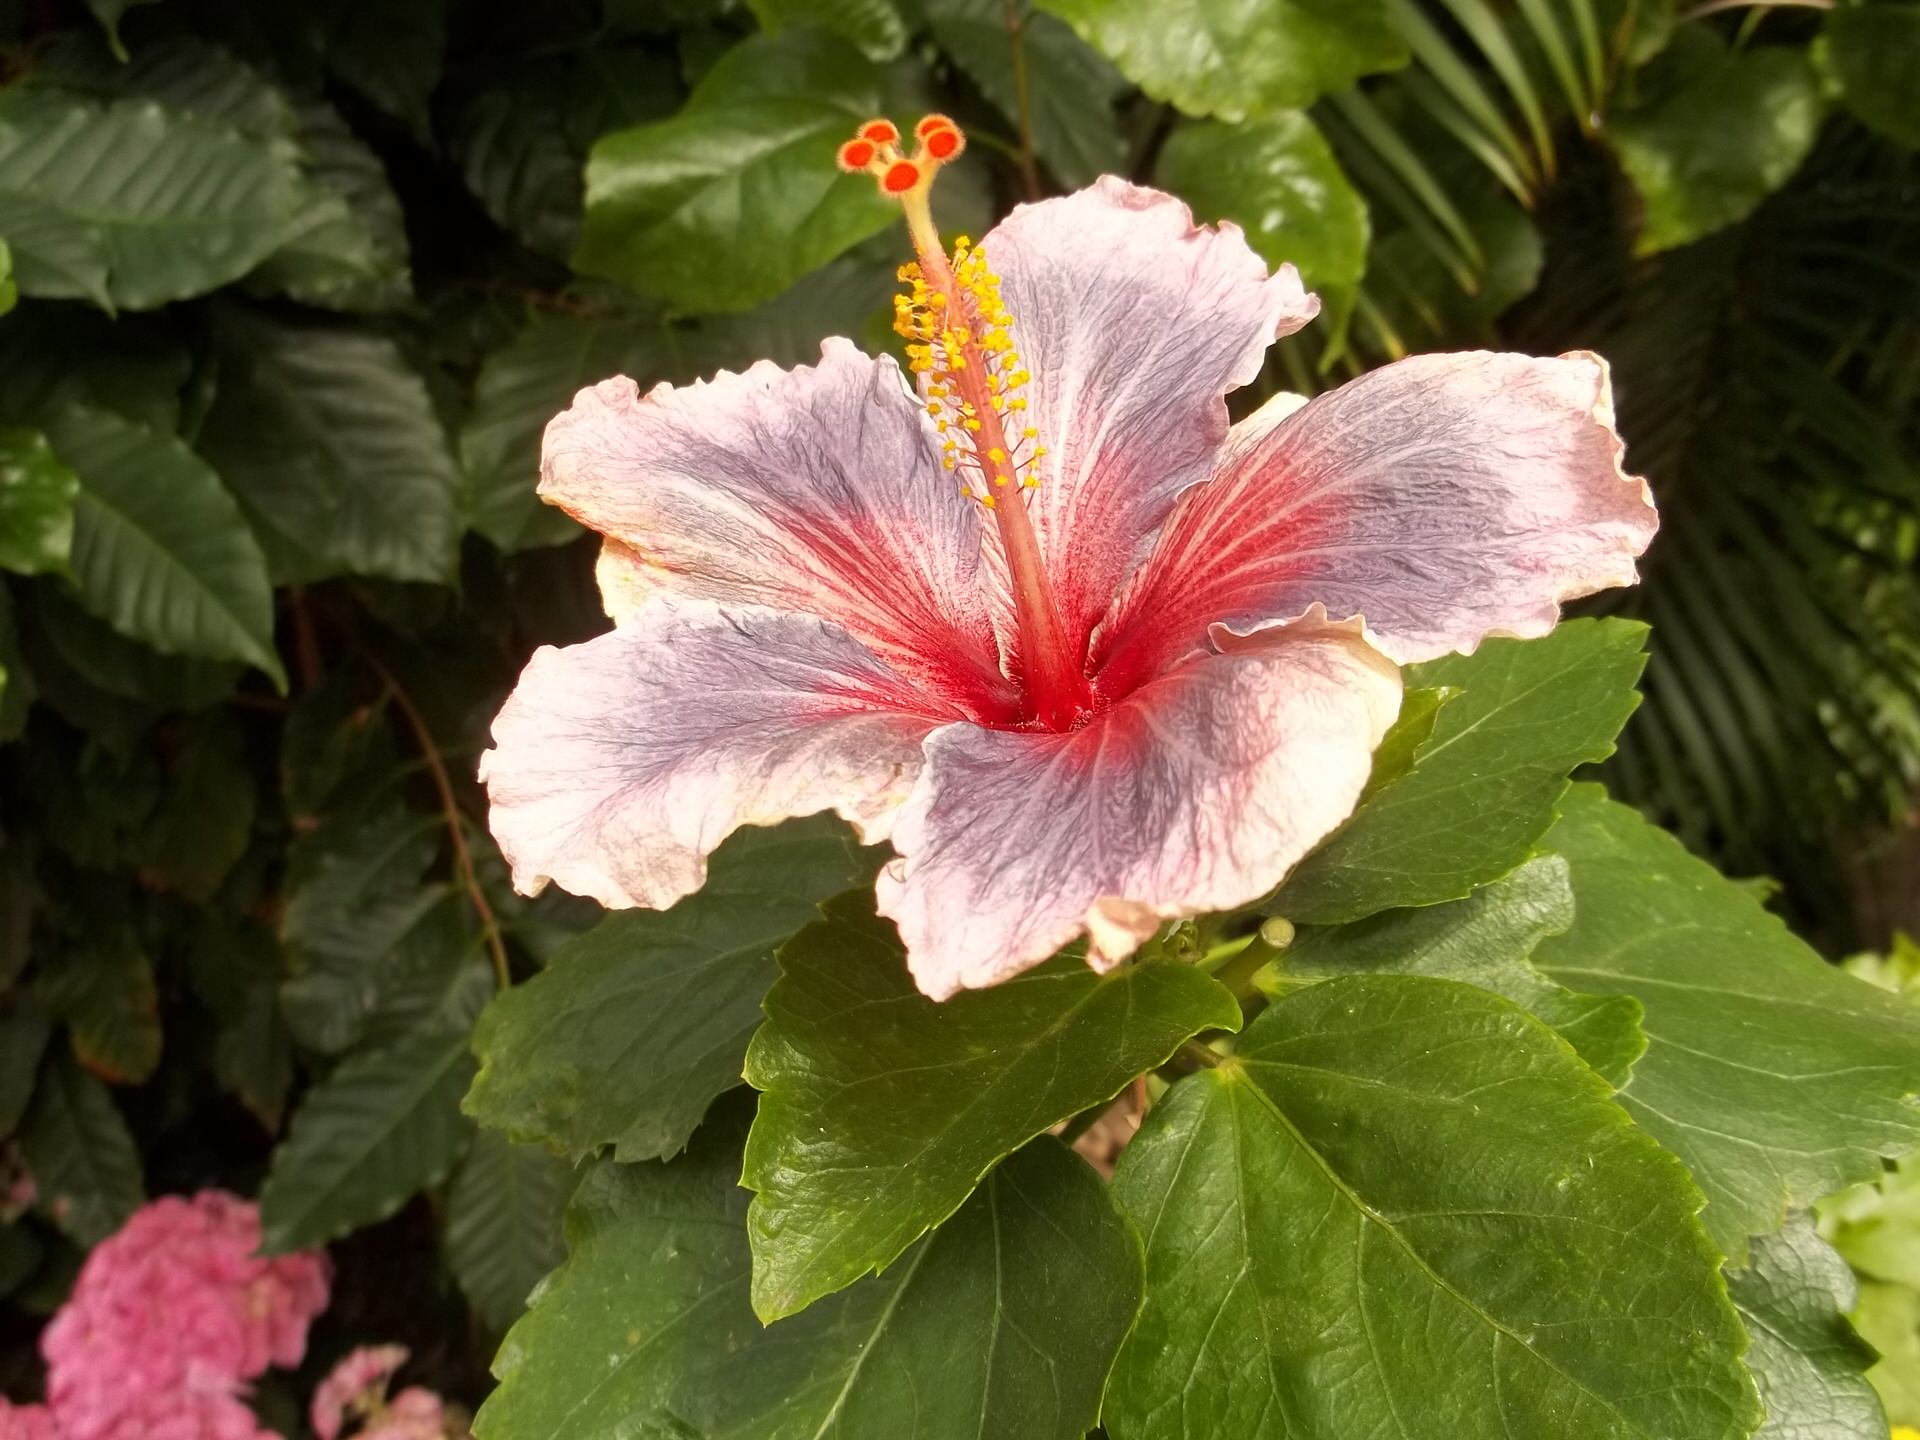 Photo of a flower taken by Wendy C. at the Buffalo and Erie County Botanical Gardens